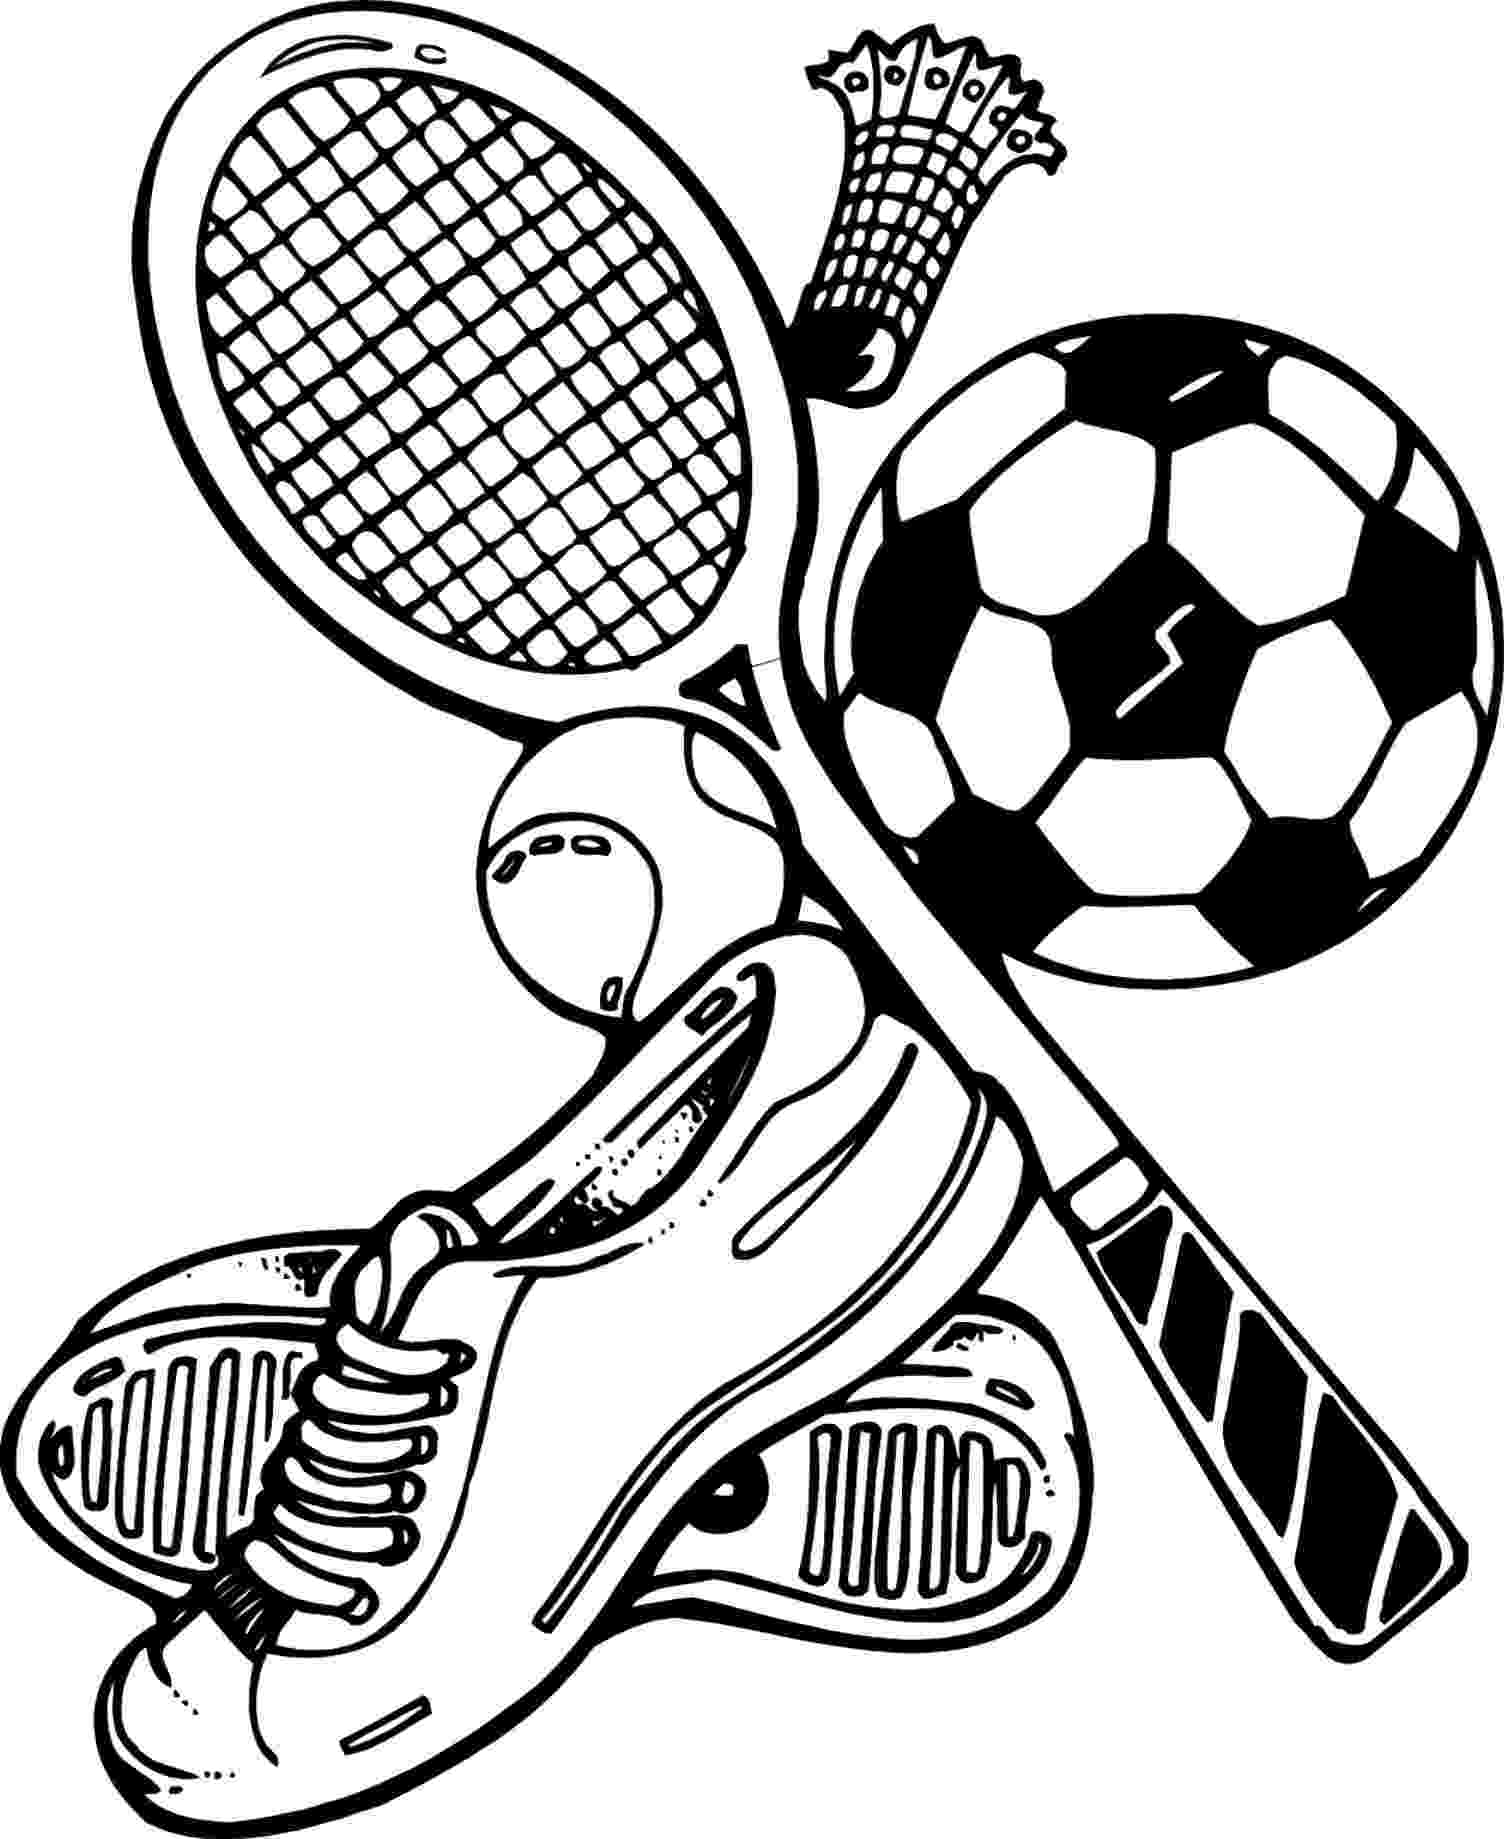 free sports coloring sheets sports coloring pages coloring pages to print free sports coloring sheets 